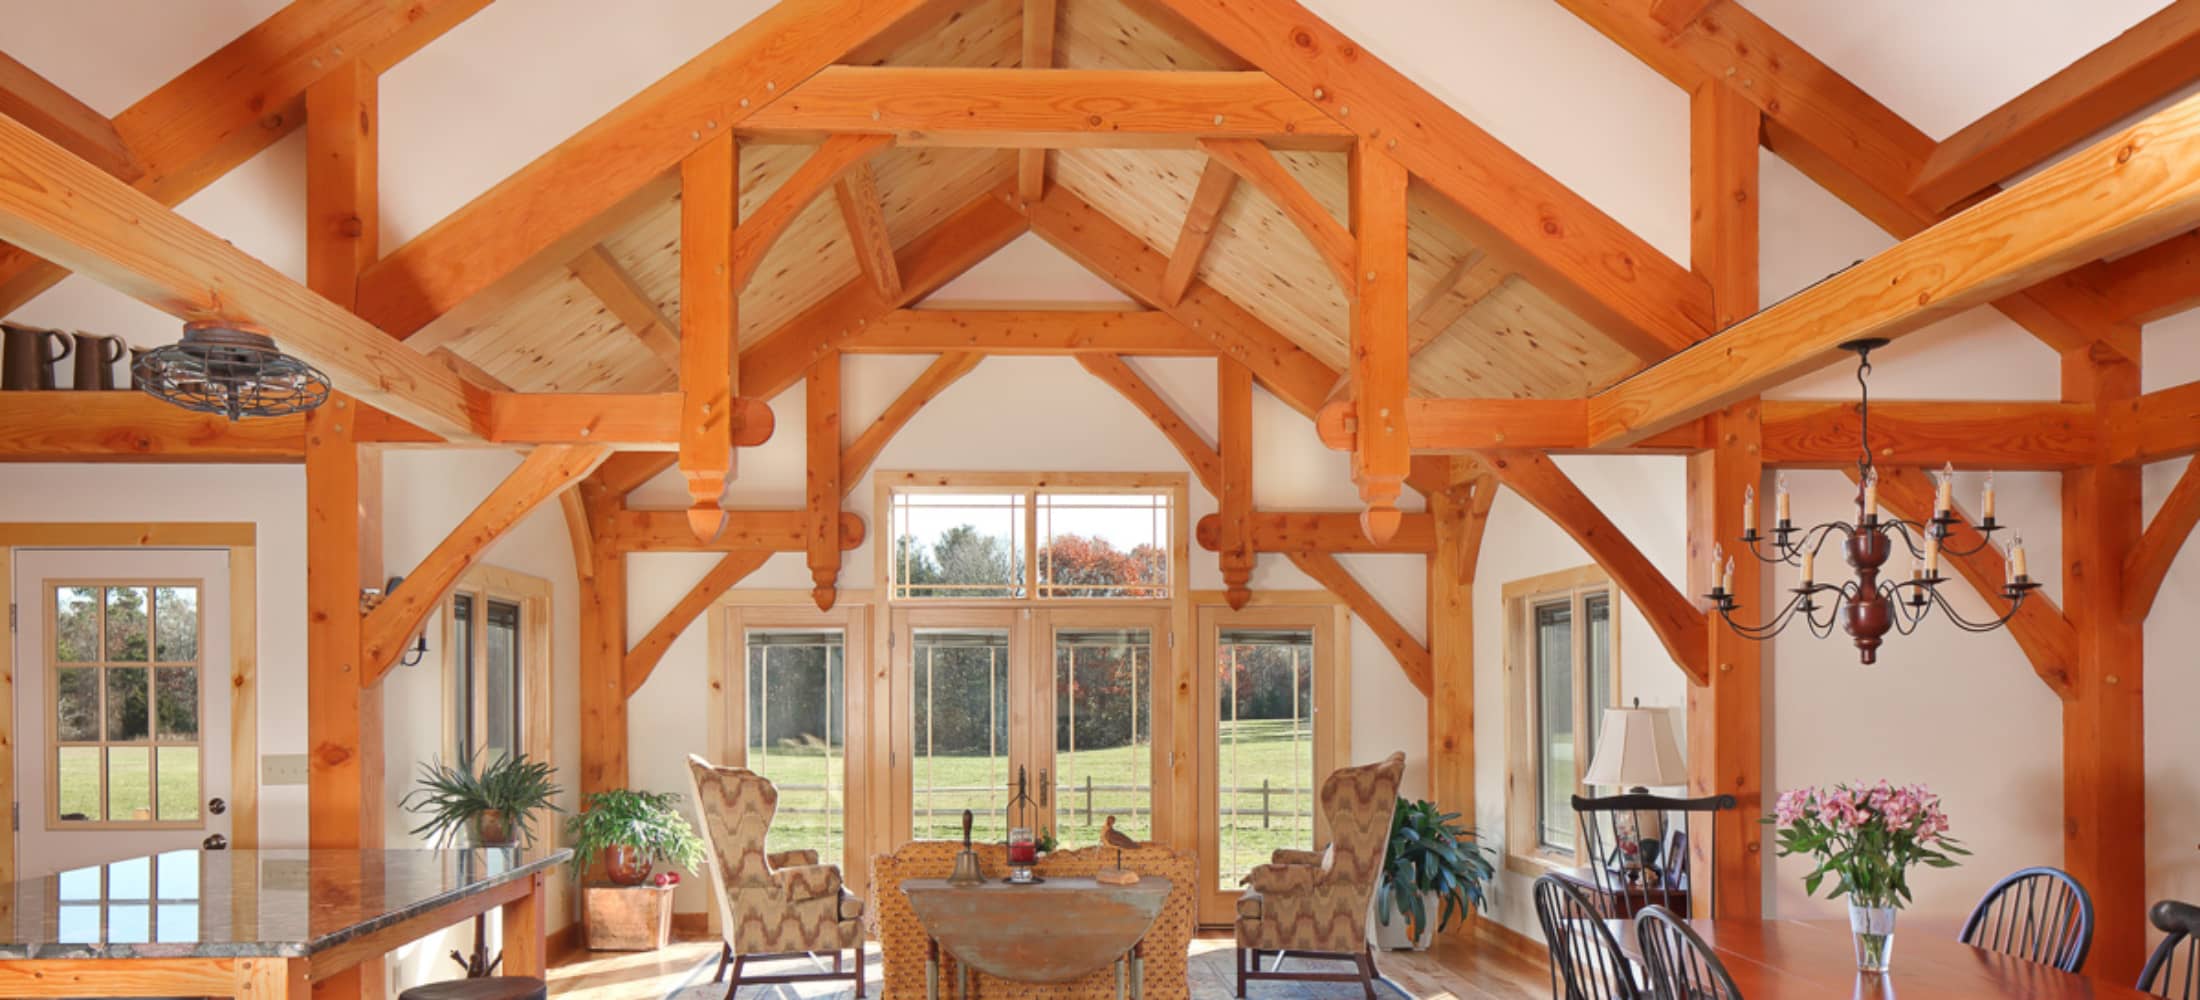 timber frame living room with trusses